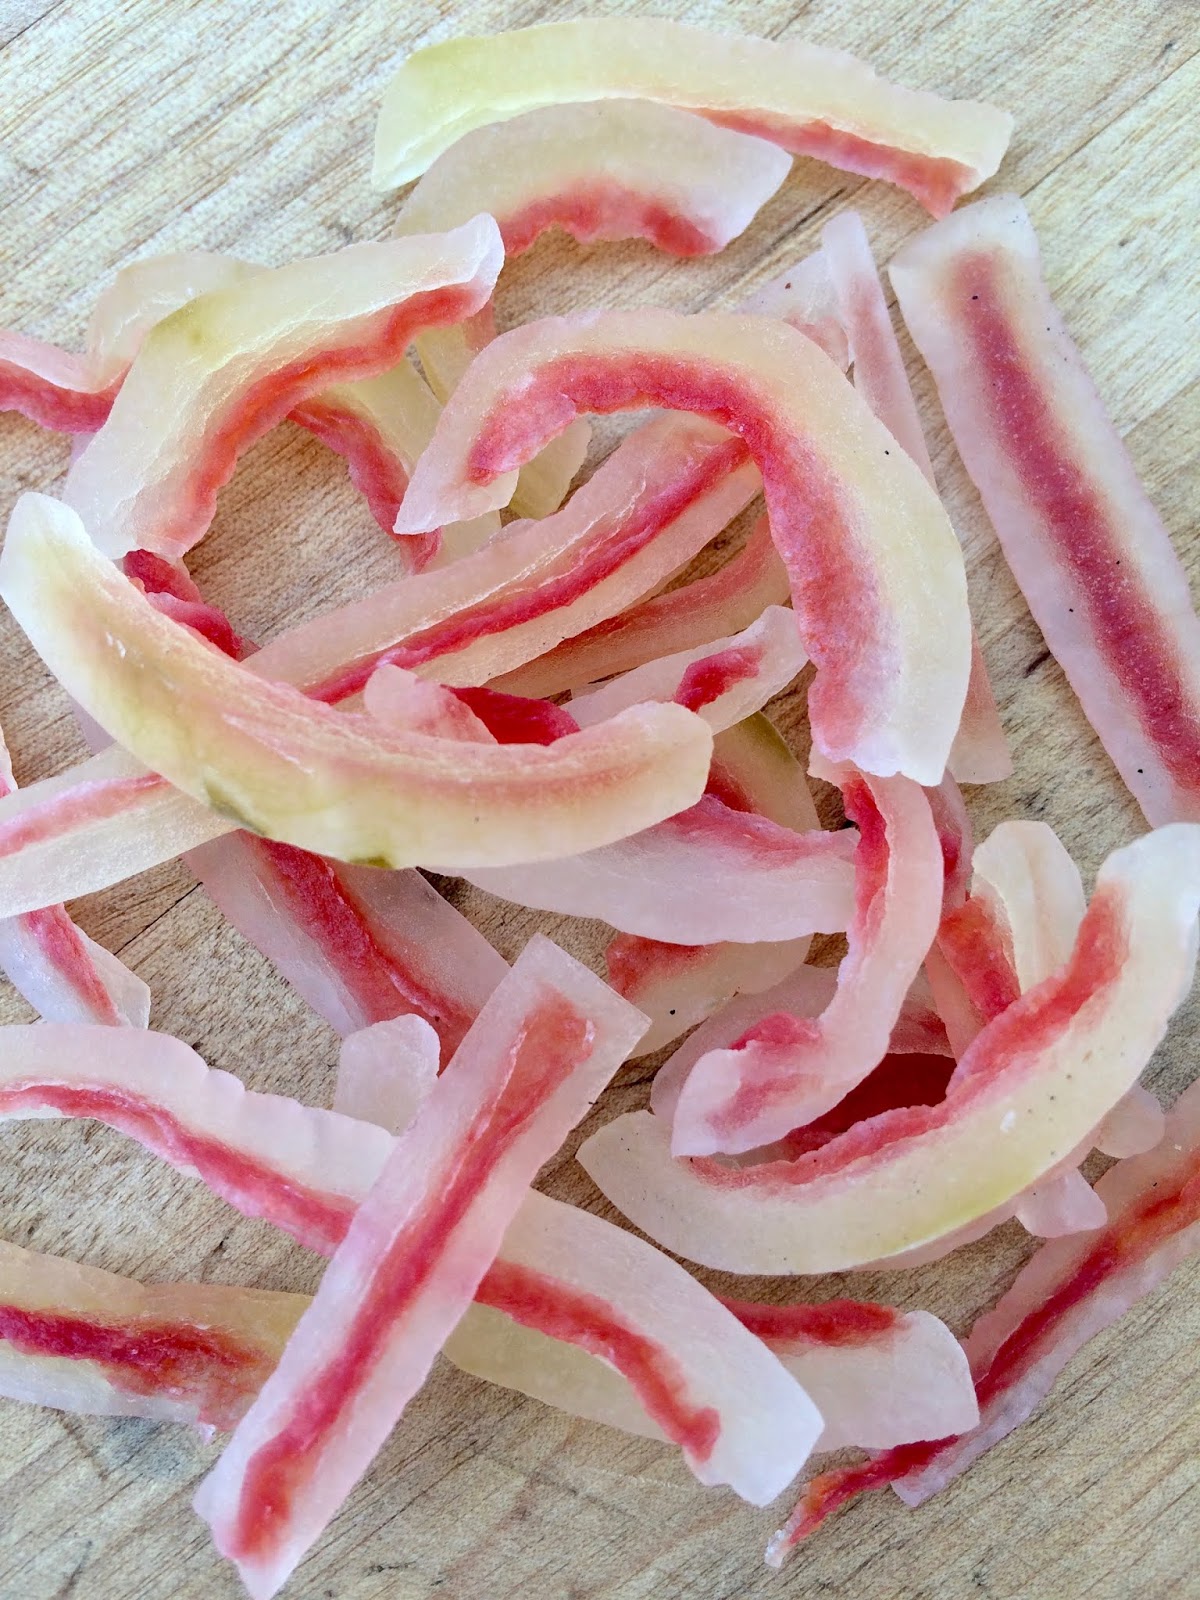 Savory Moments: Candied watermelon rind